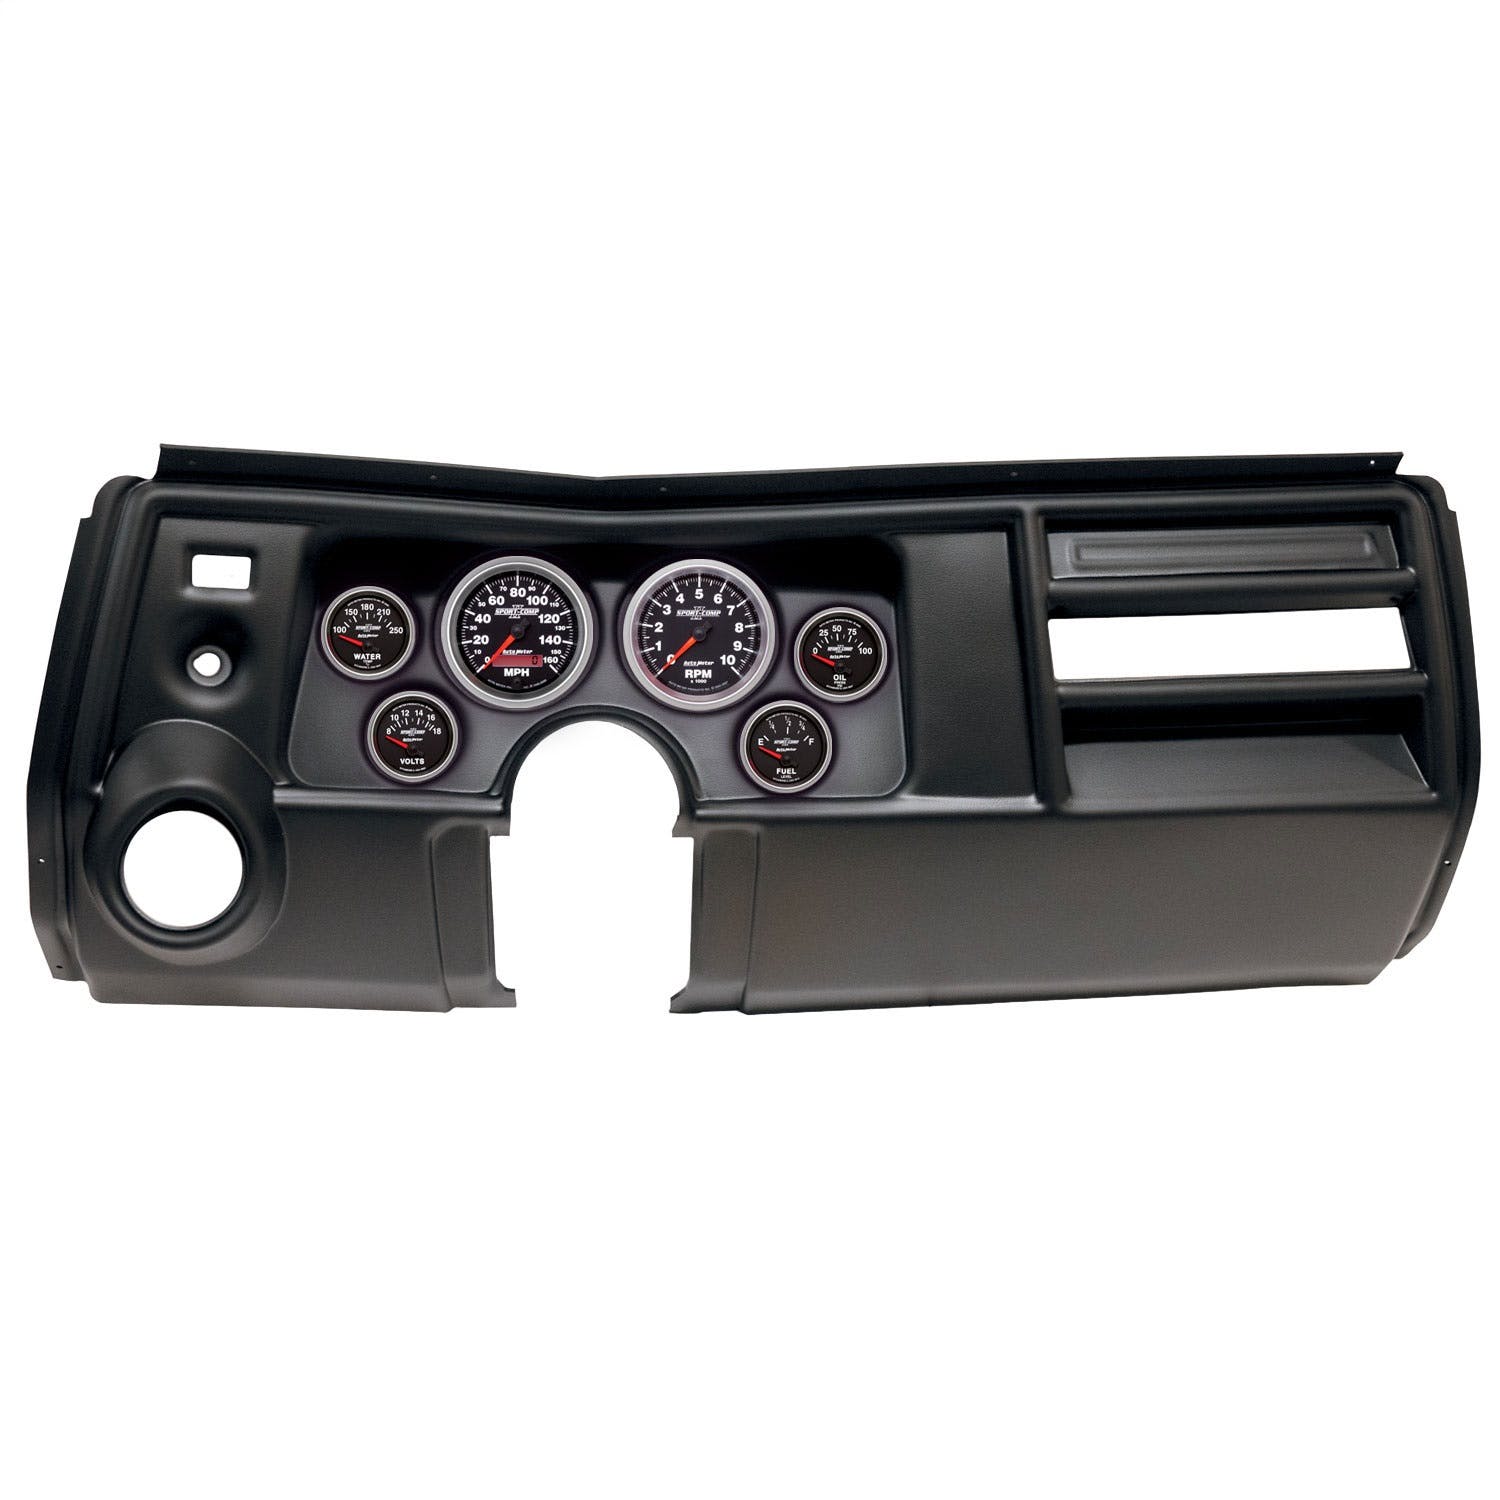 AutoMeter Products 2909-12 6 Gauge Direct-Fit Dash Kit, Chevy Chevelle Vent 69, Sport-Comp II